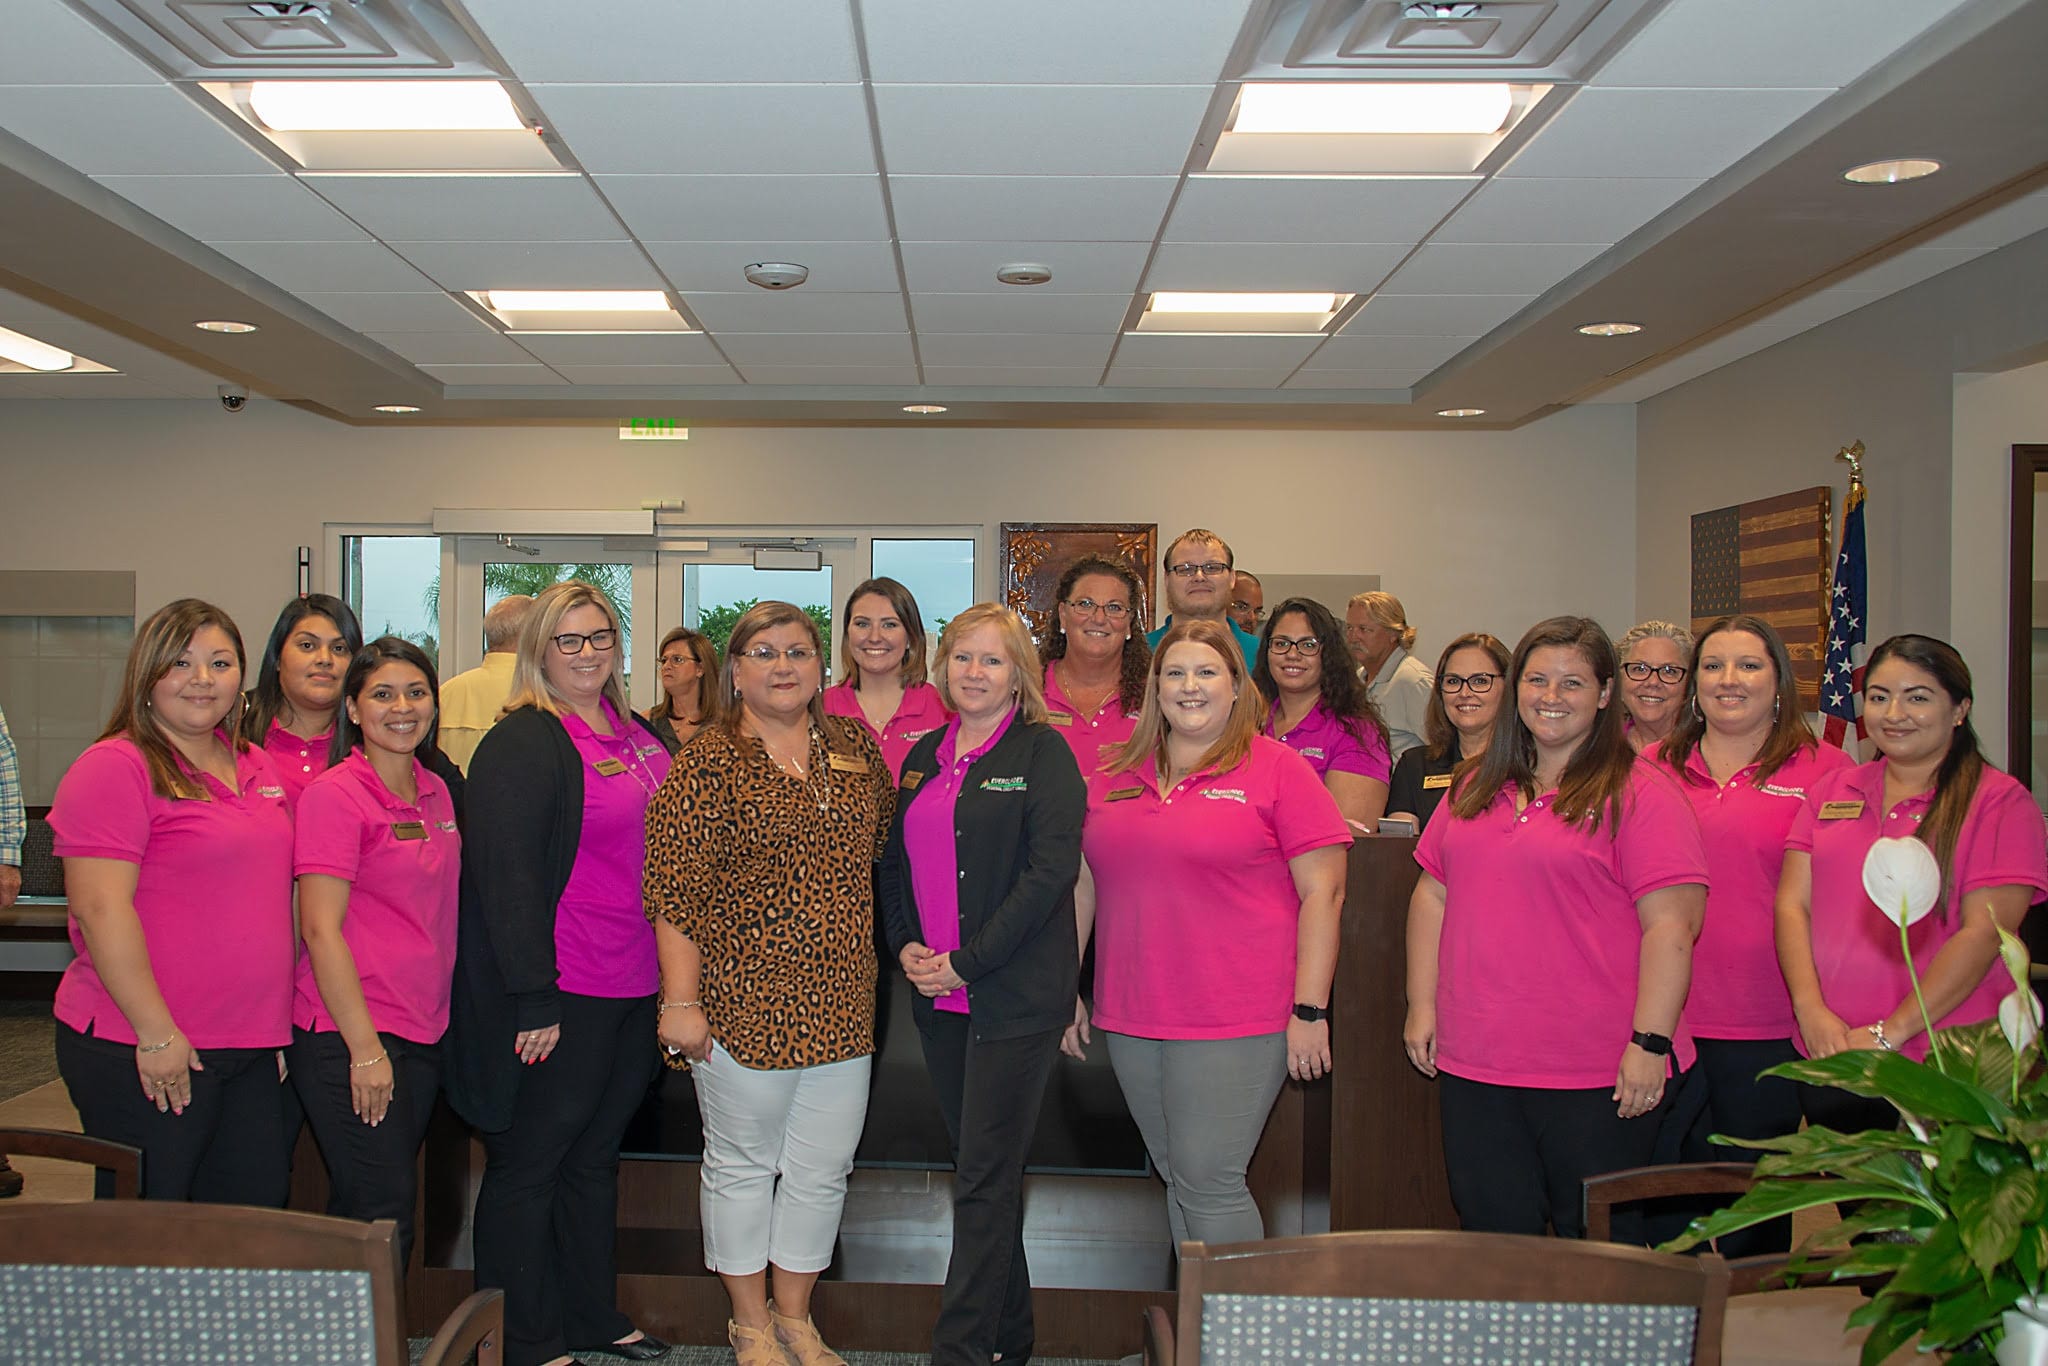 Staff of Everglades Federal Credit Union wearing pink shirts and smiling in a group